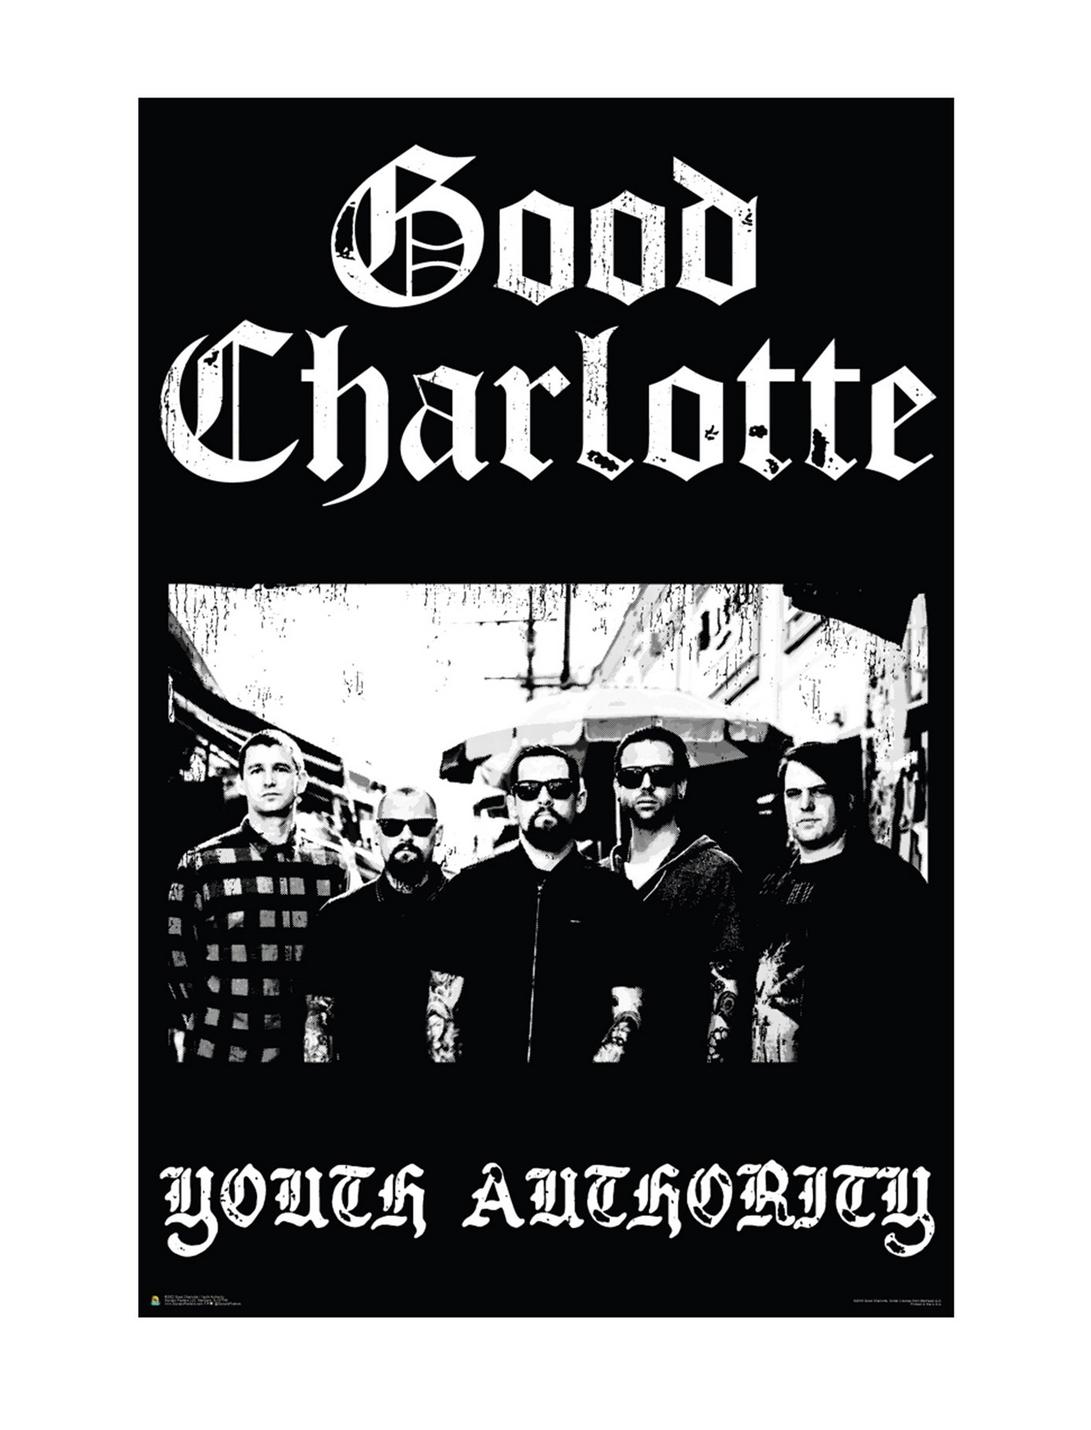 Good Charlotte Youth Authority Poster, , hi-res